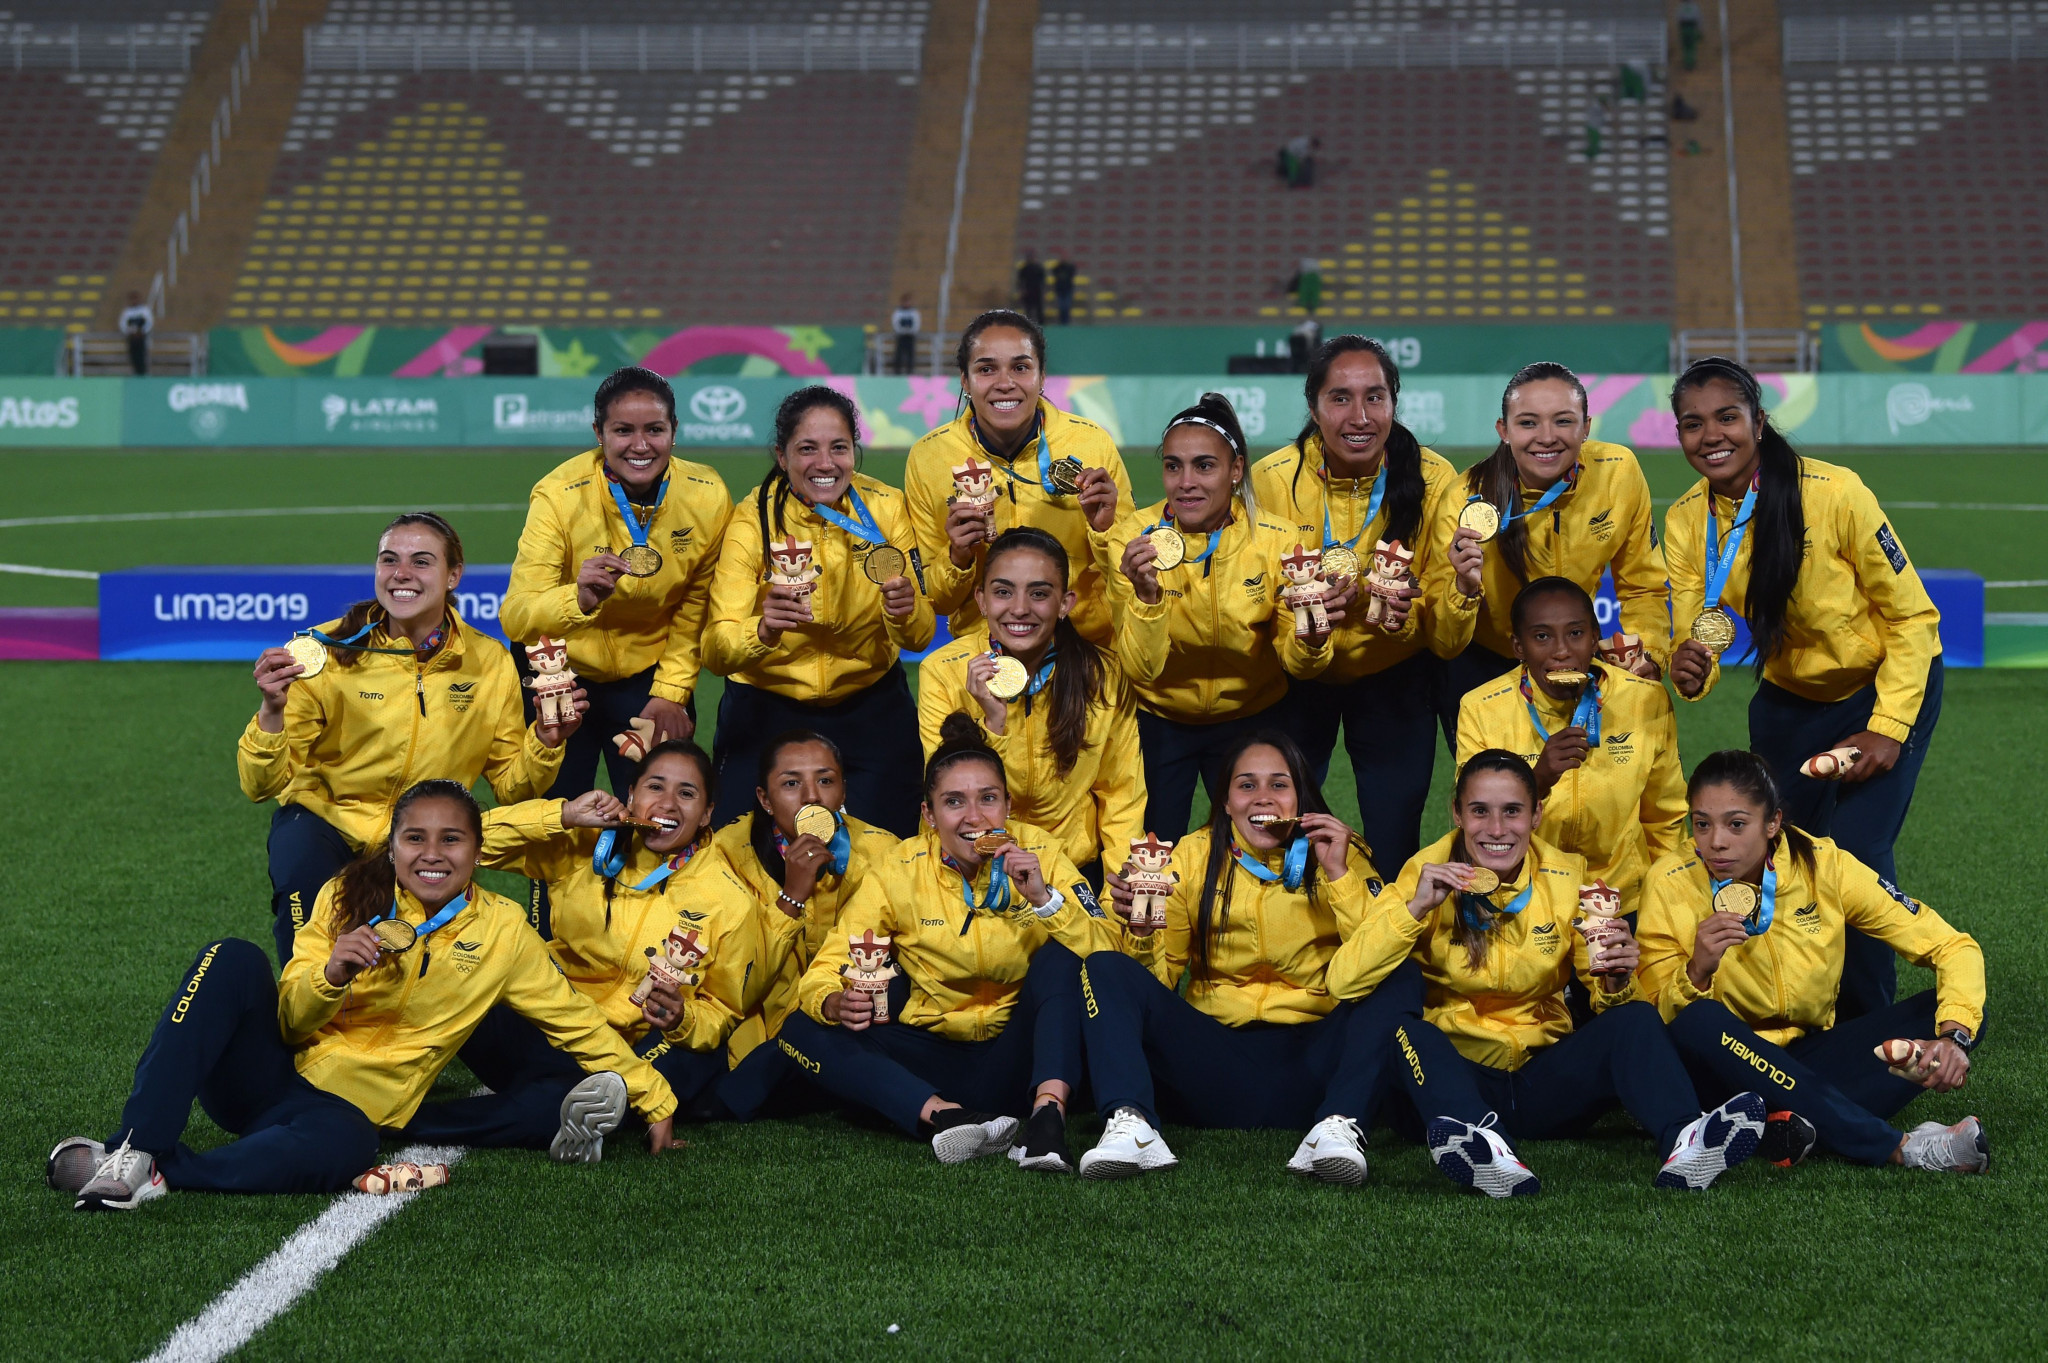 Colombia won gold in women's football at the Lima 2019 Pan American Games ©Getty Images